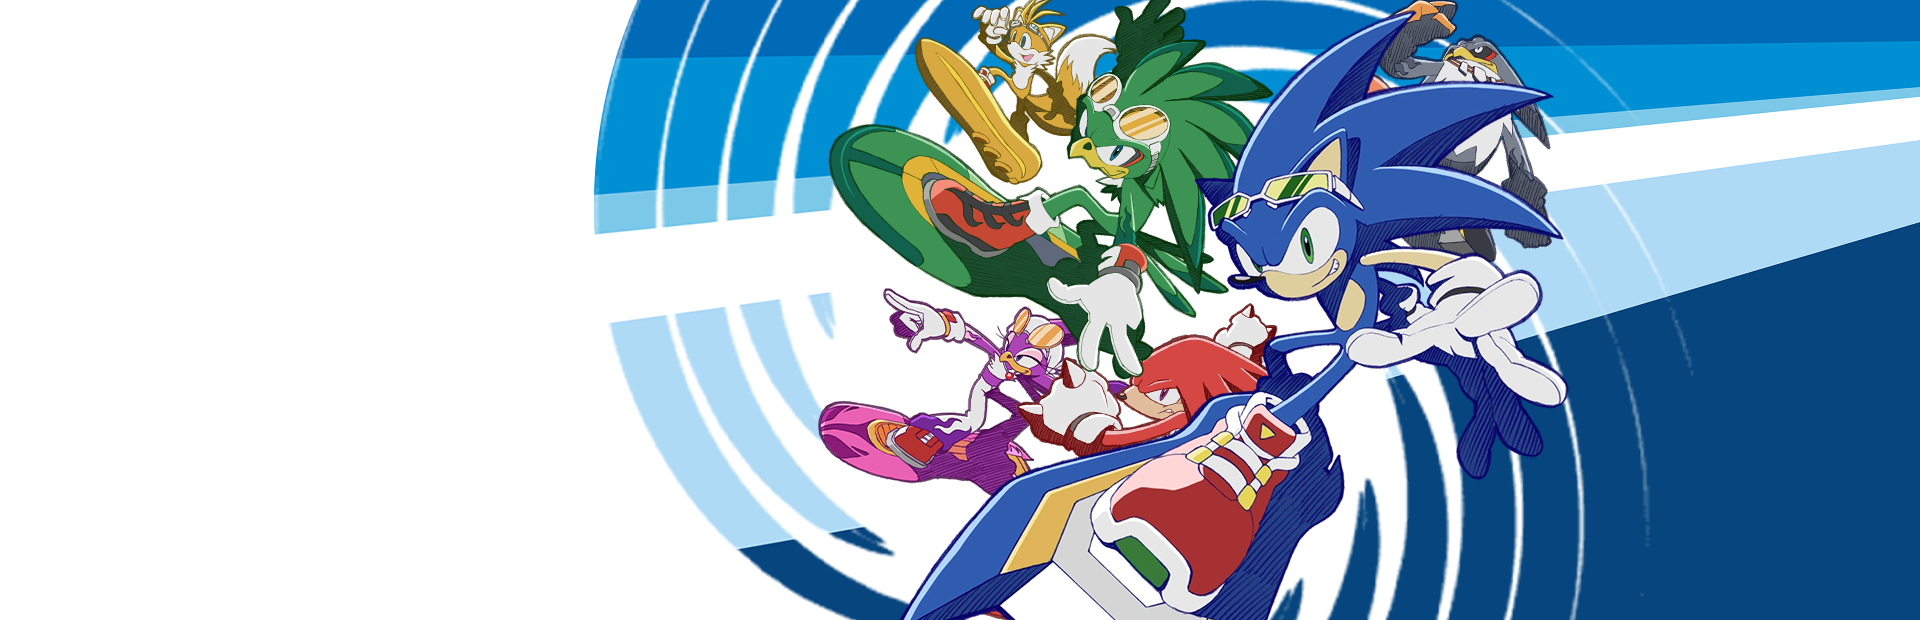 Sonic Riders Wallpapers  Wallpaper Cave